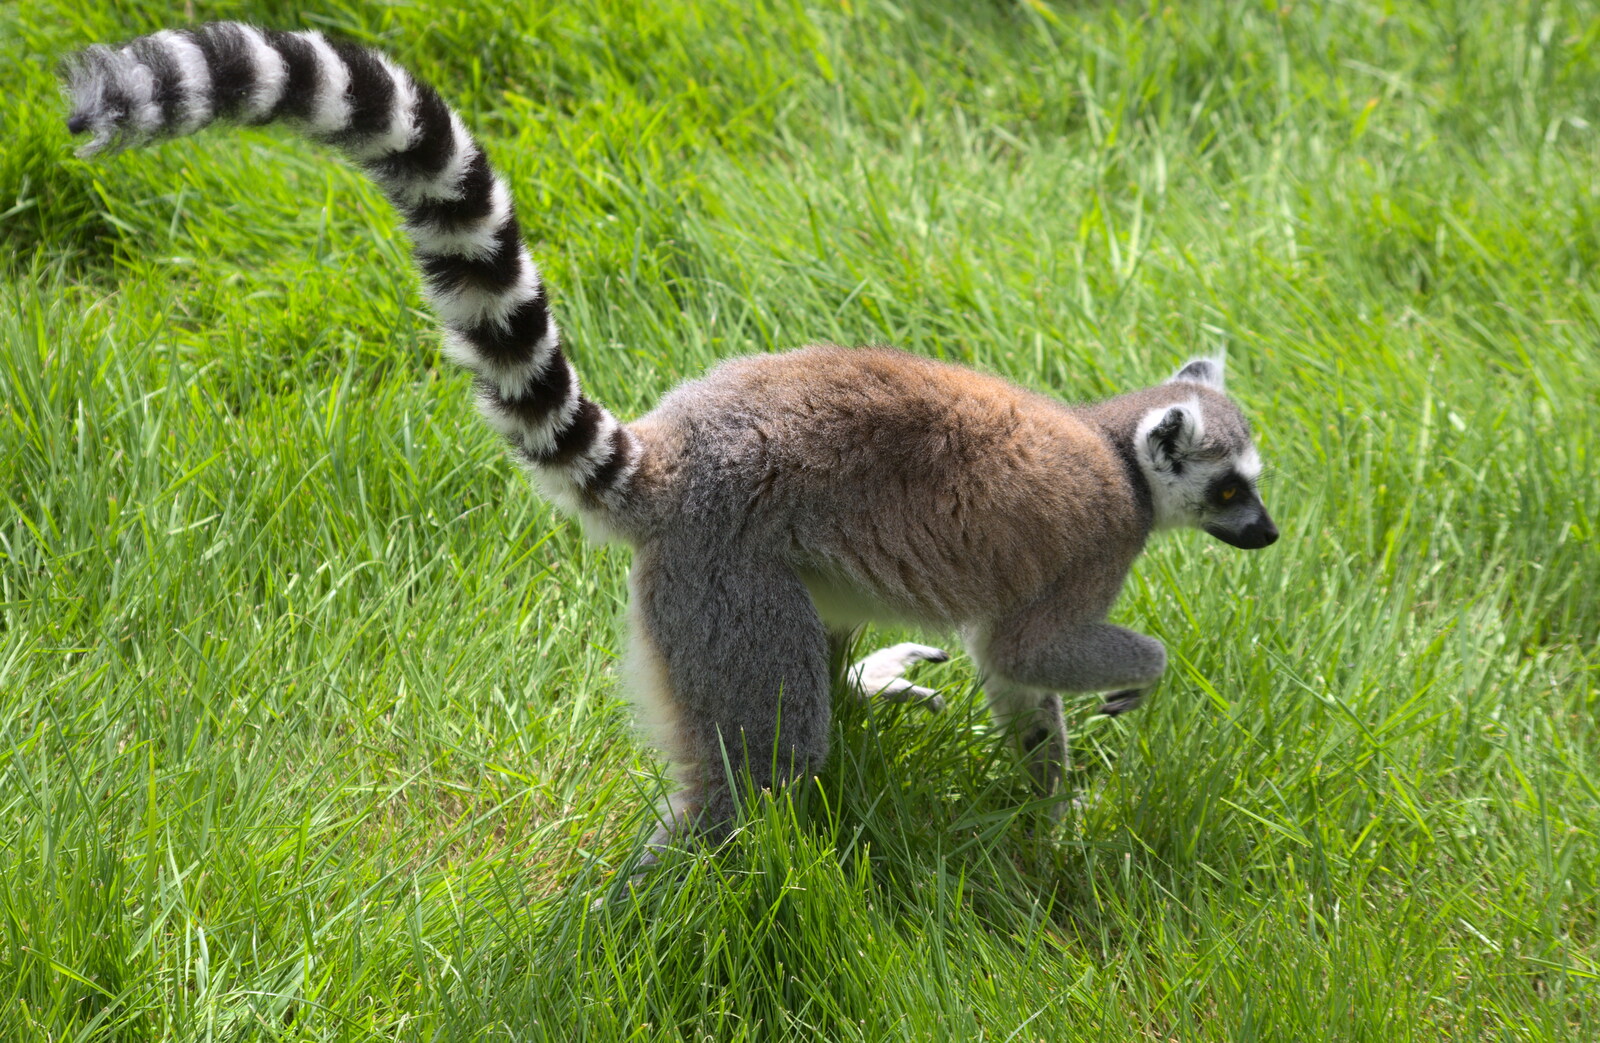 A stripey-tailed lemur from A Birthday Trip to the Zoo, Banham, Norfolk - 26th May 2014